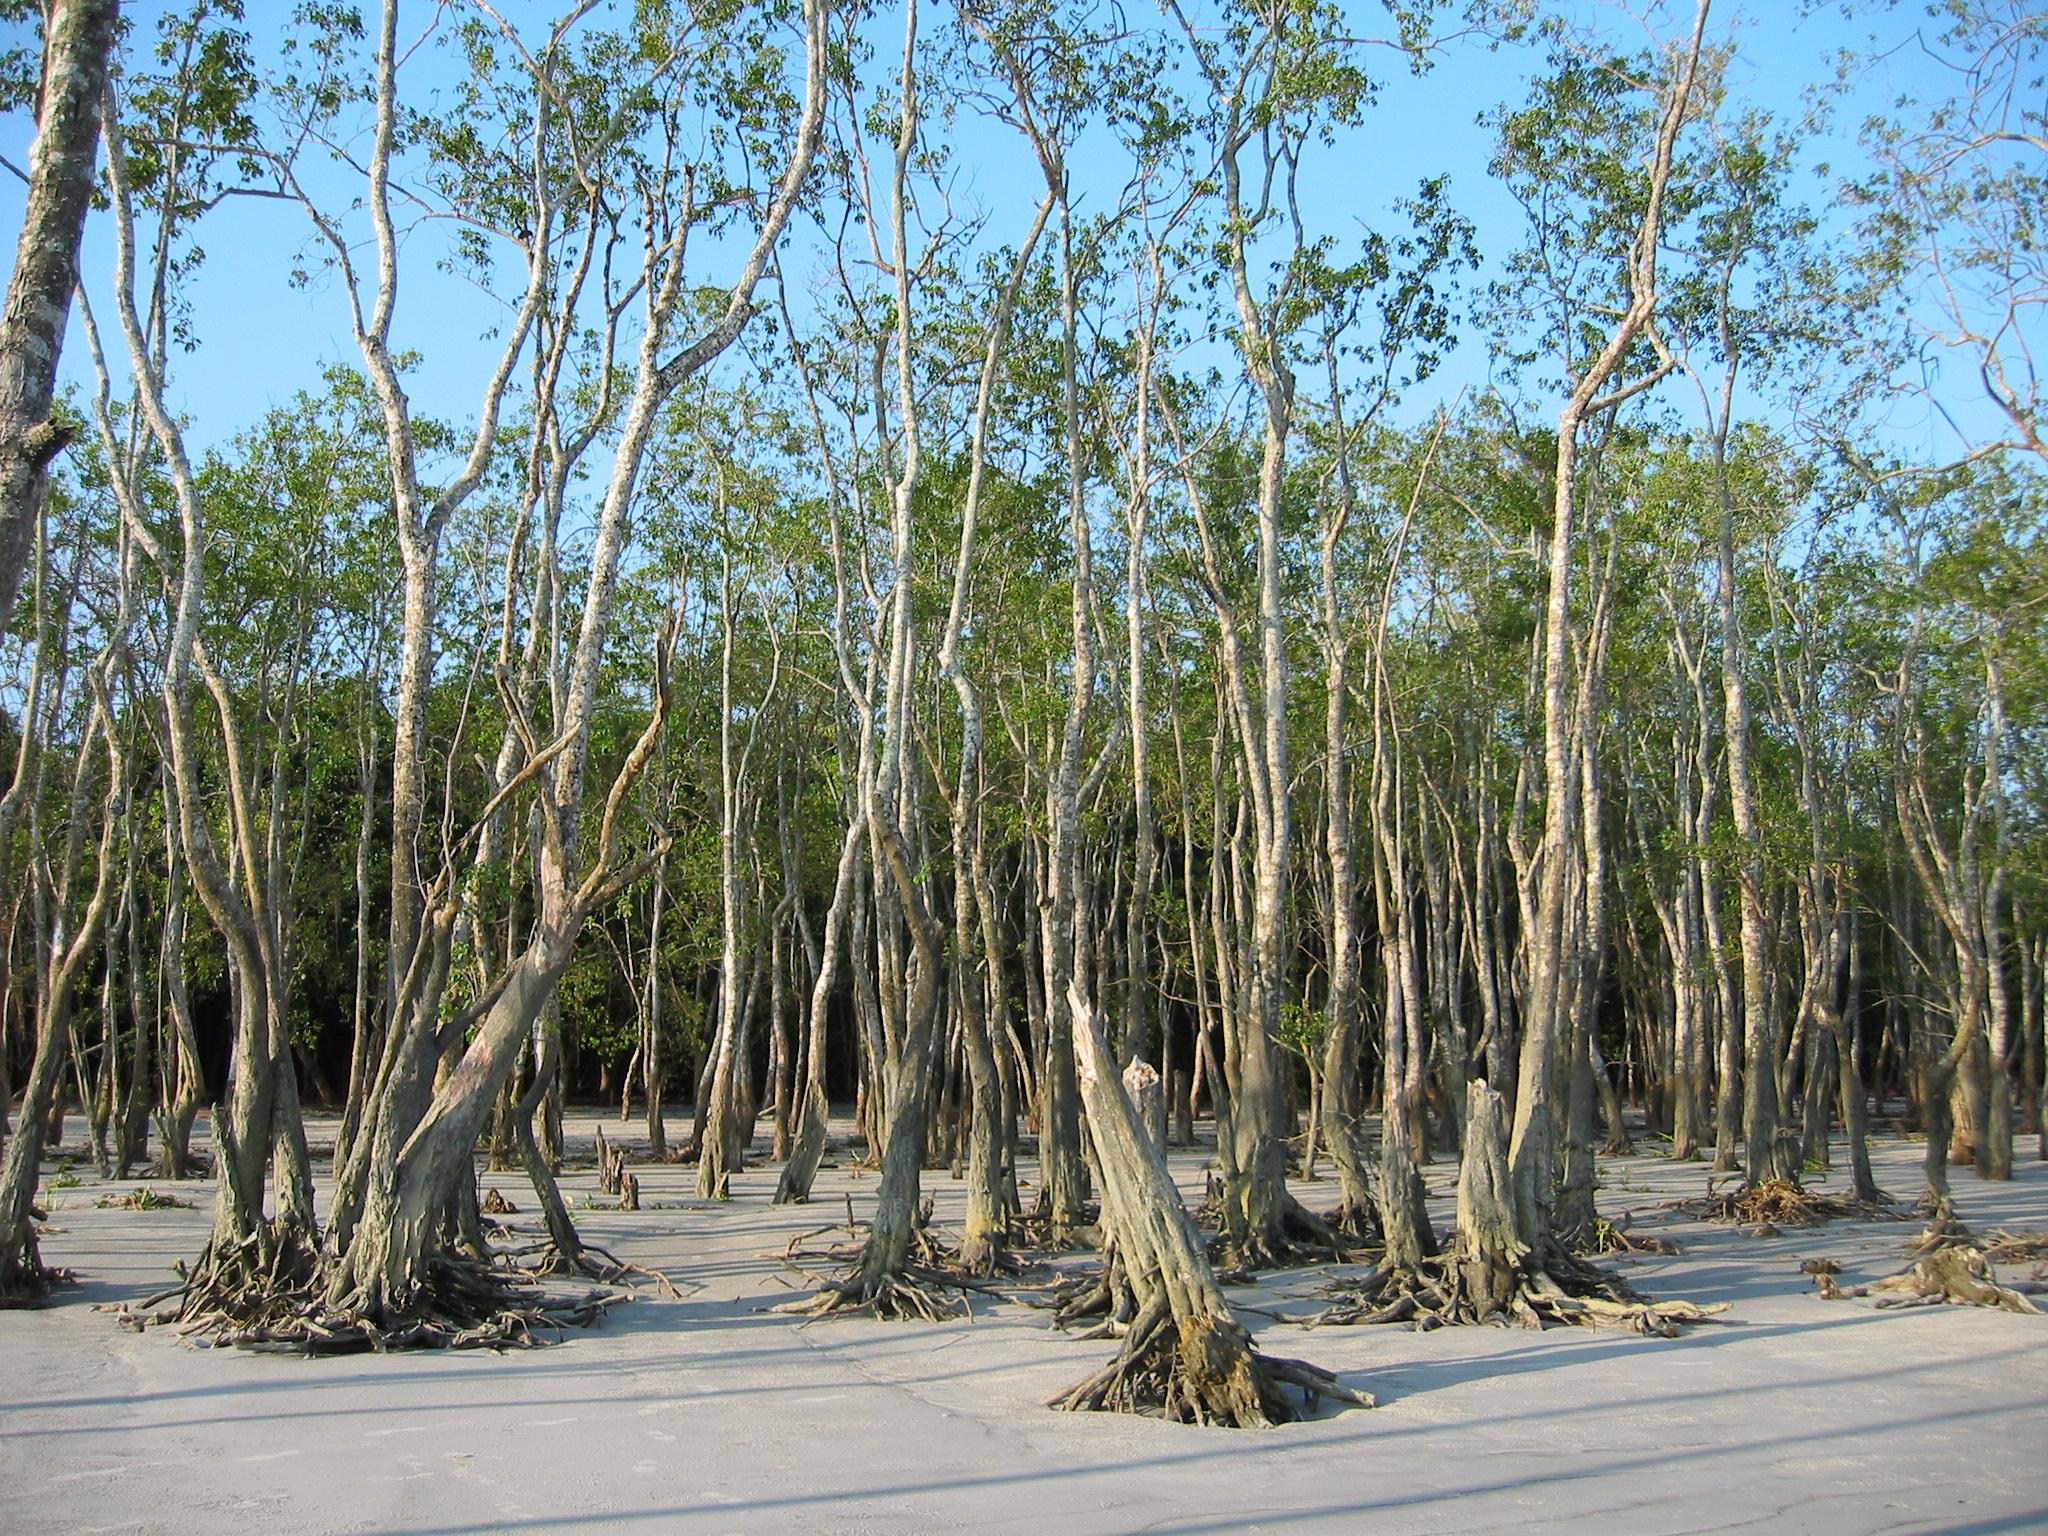 Mangrove forests are threatened by coastal development (Source: www.sundarban.org)